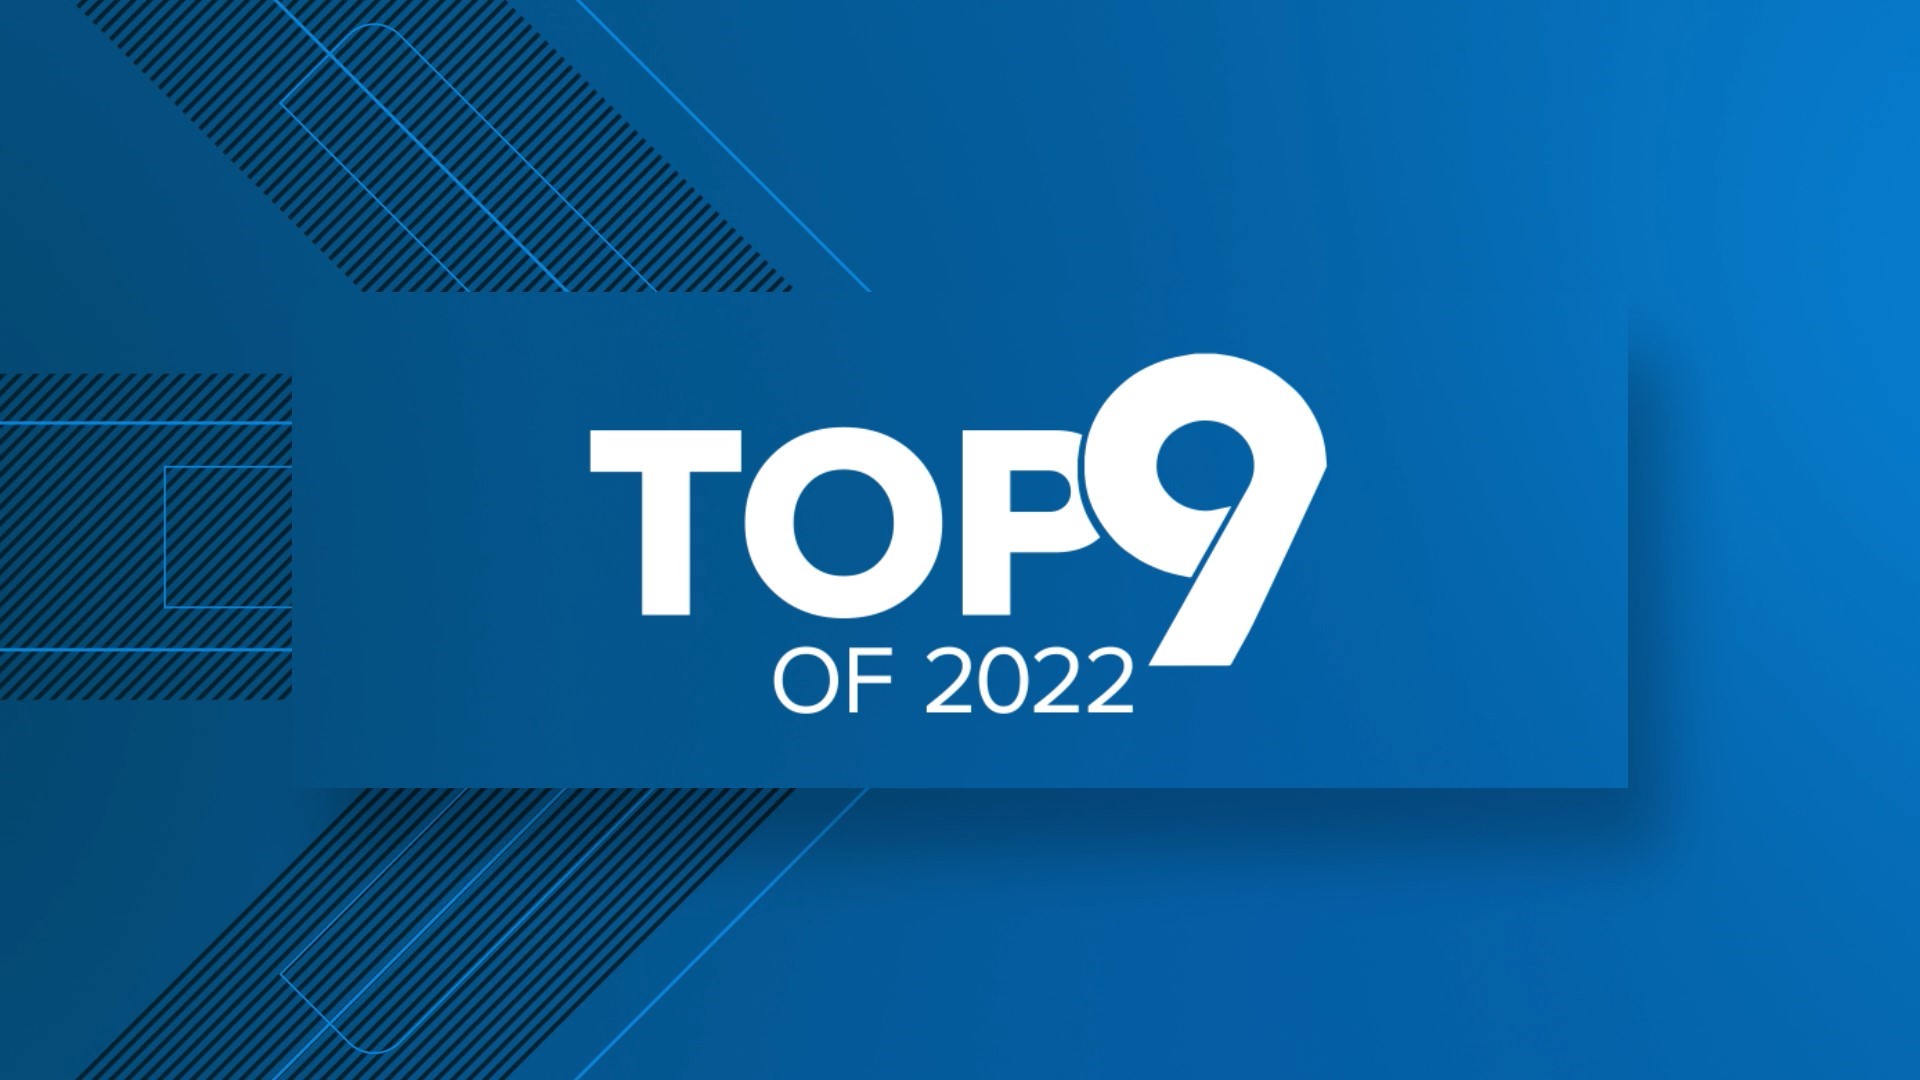 We take a look back at the top 9 stories of 2022 in this WUSA9+ special.